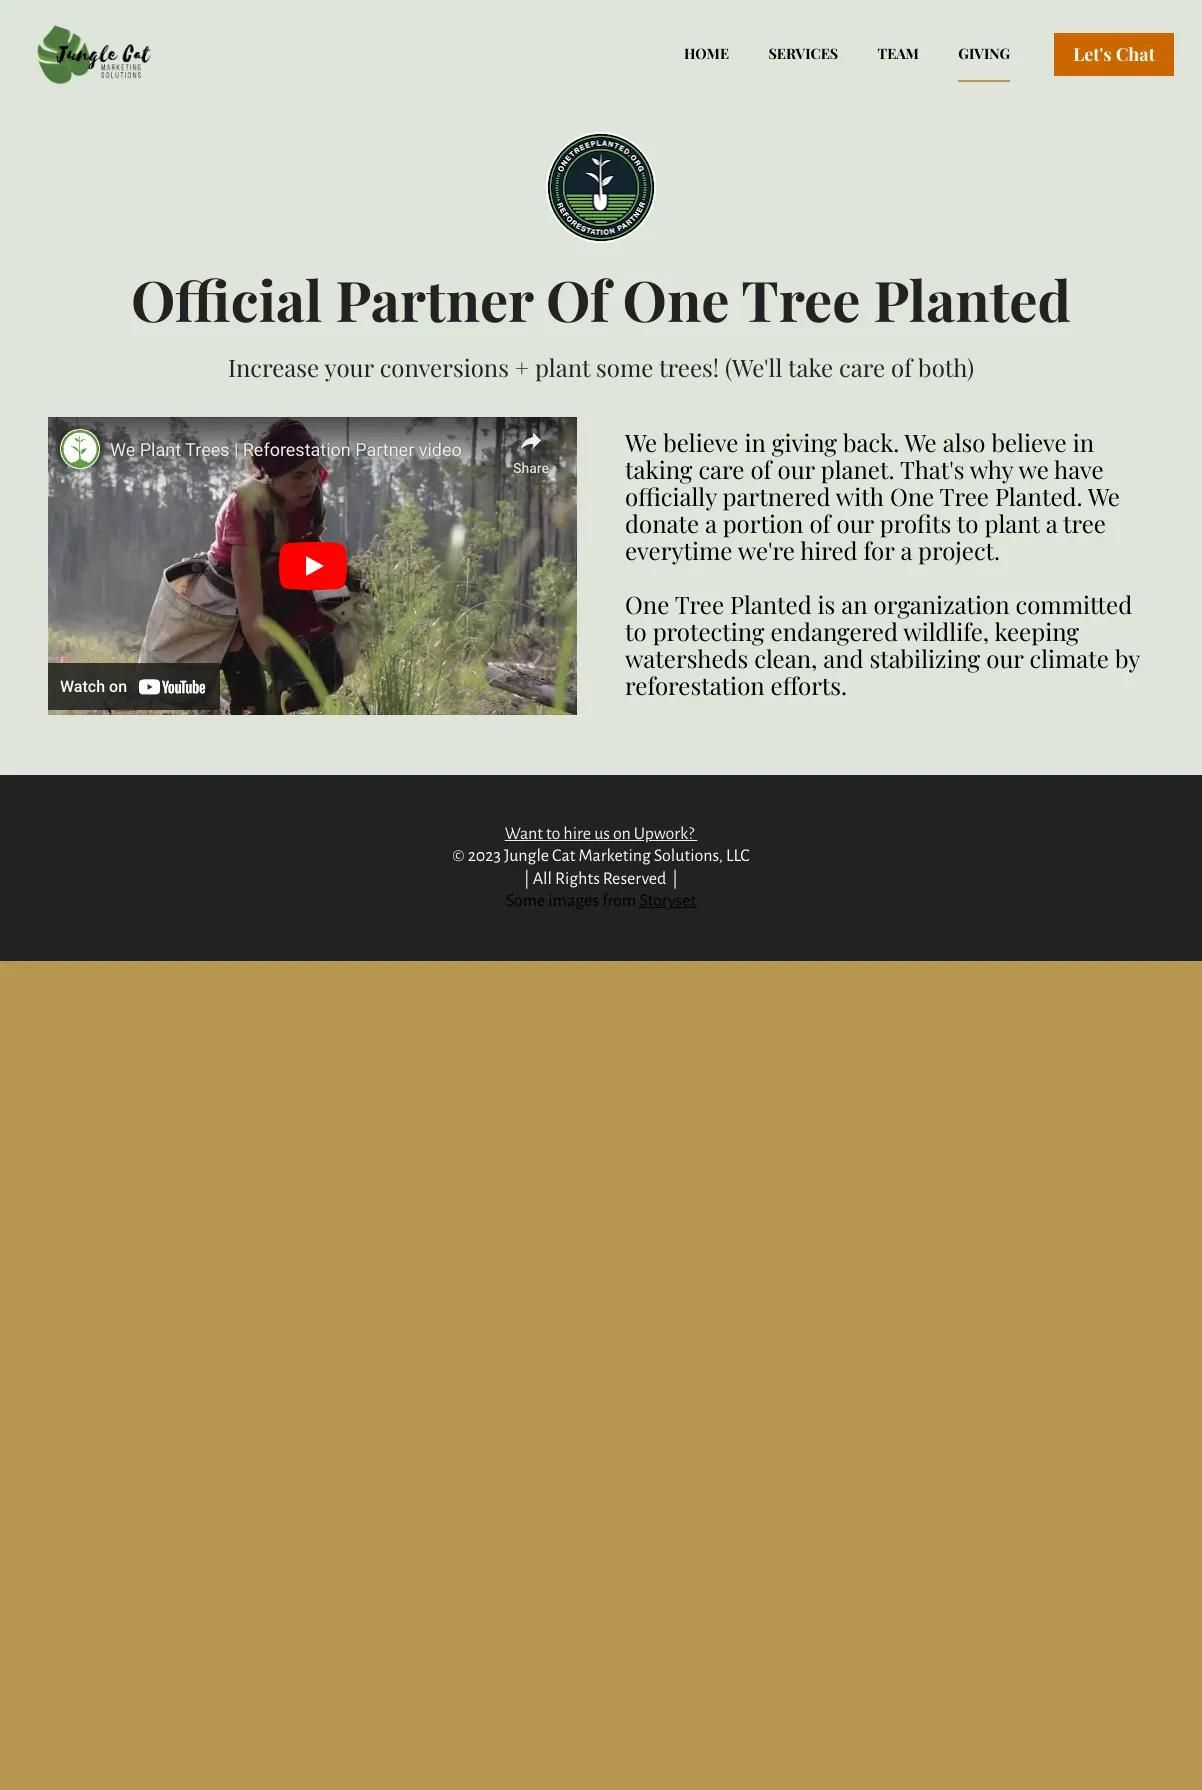 Screenshot 3 of Jungle Cat Marketing (Example Leadpages Website)